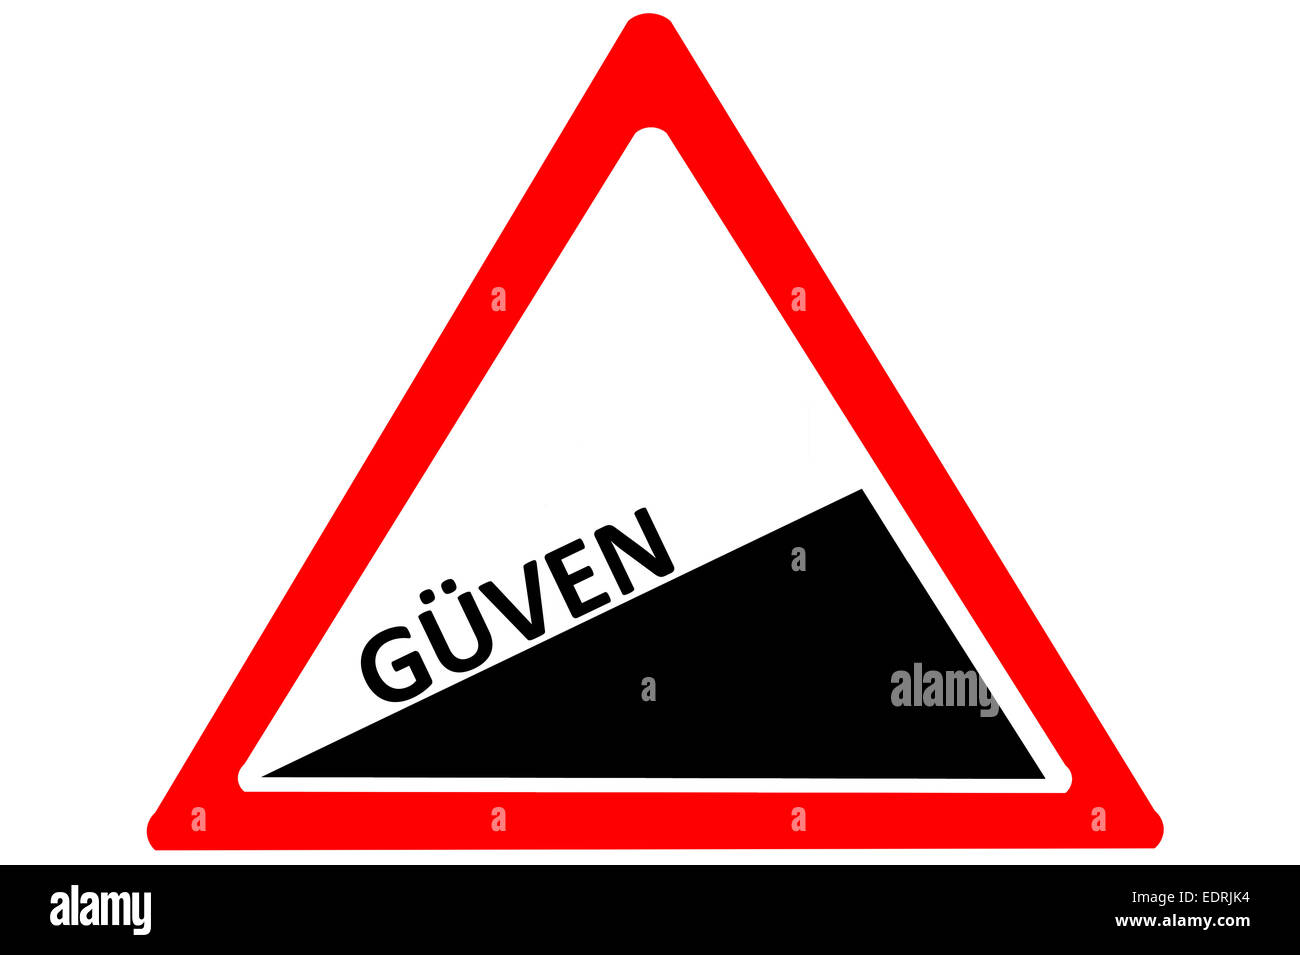 Trust Turkish guven increasing warning road sign isolated on white background Stock Photo